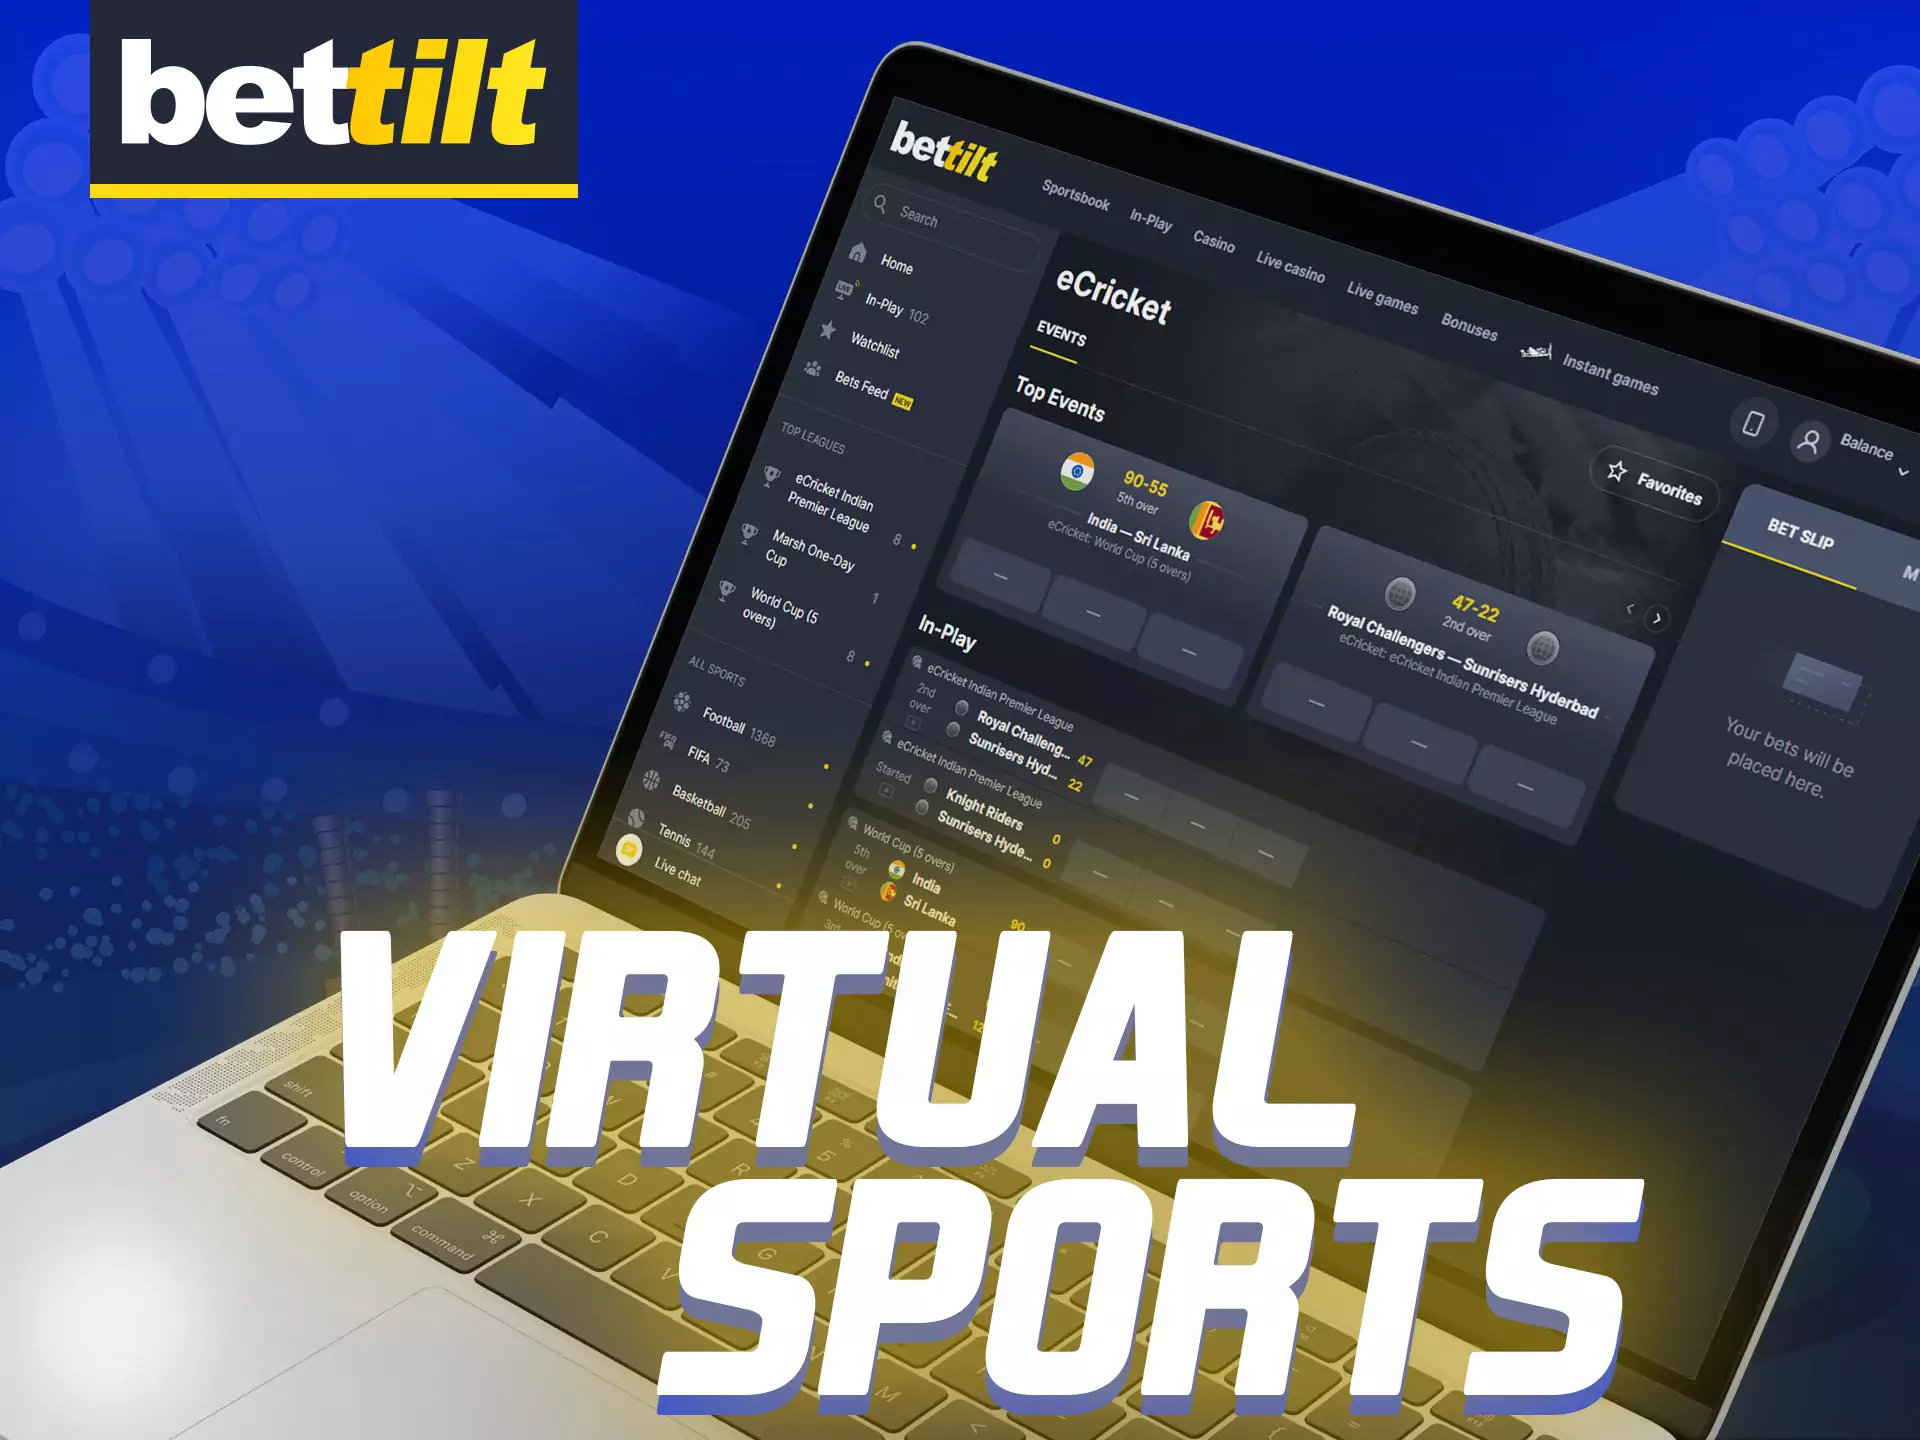 At Bettilt, place bets on virtual sports.